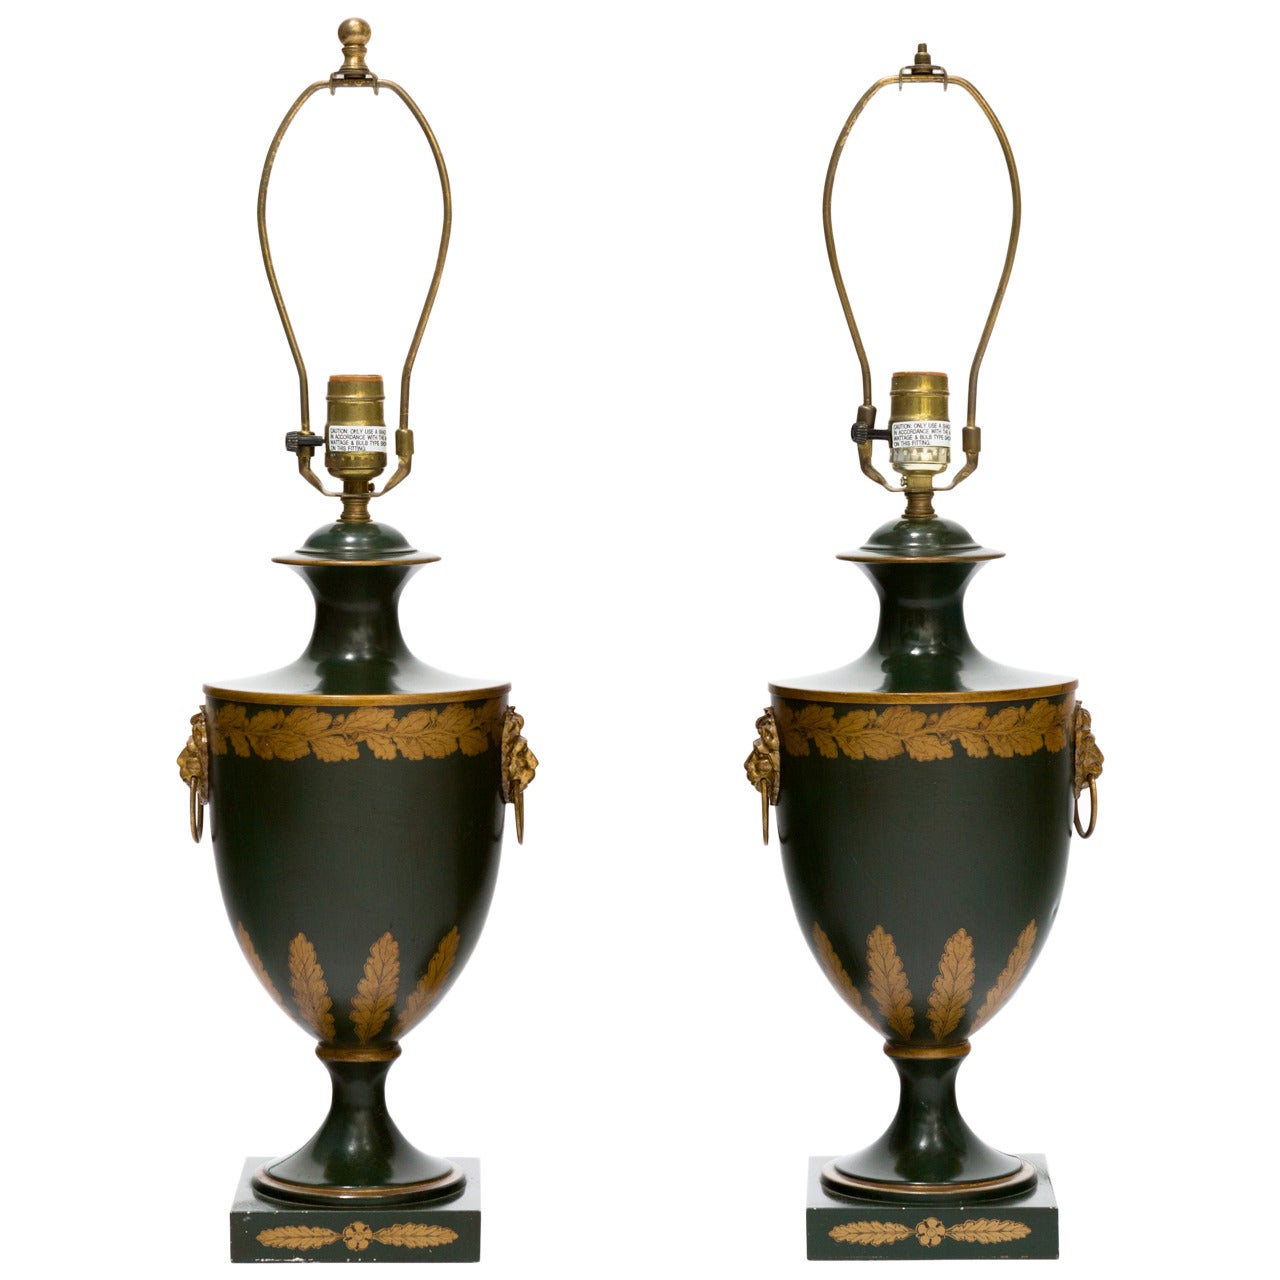 Pair of Tole Urn Table Lamps by Vaughn